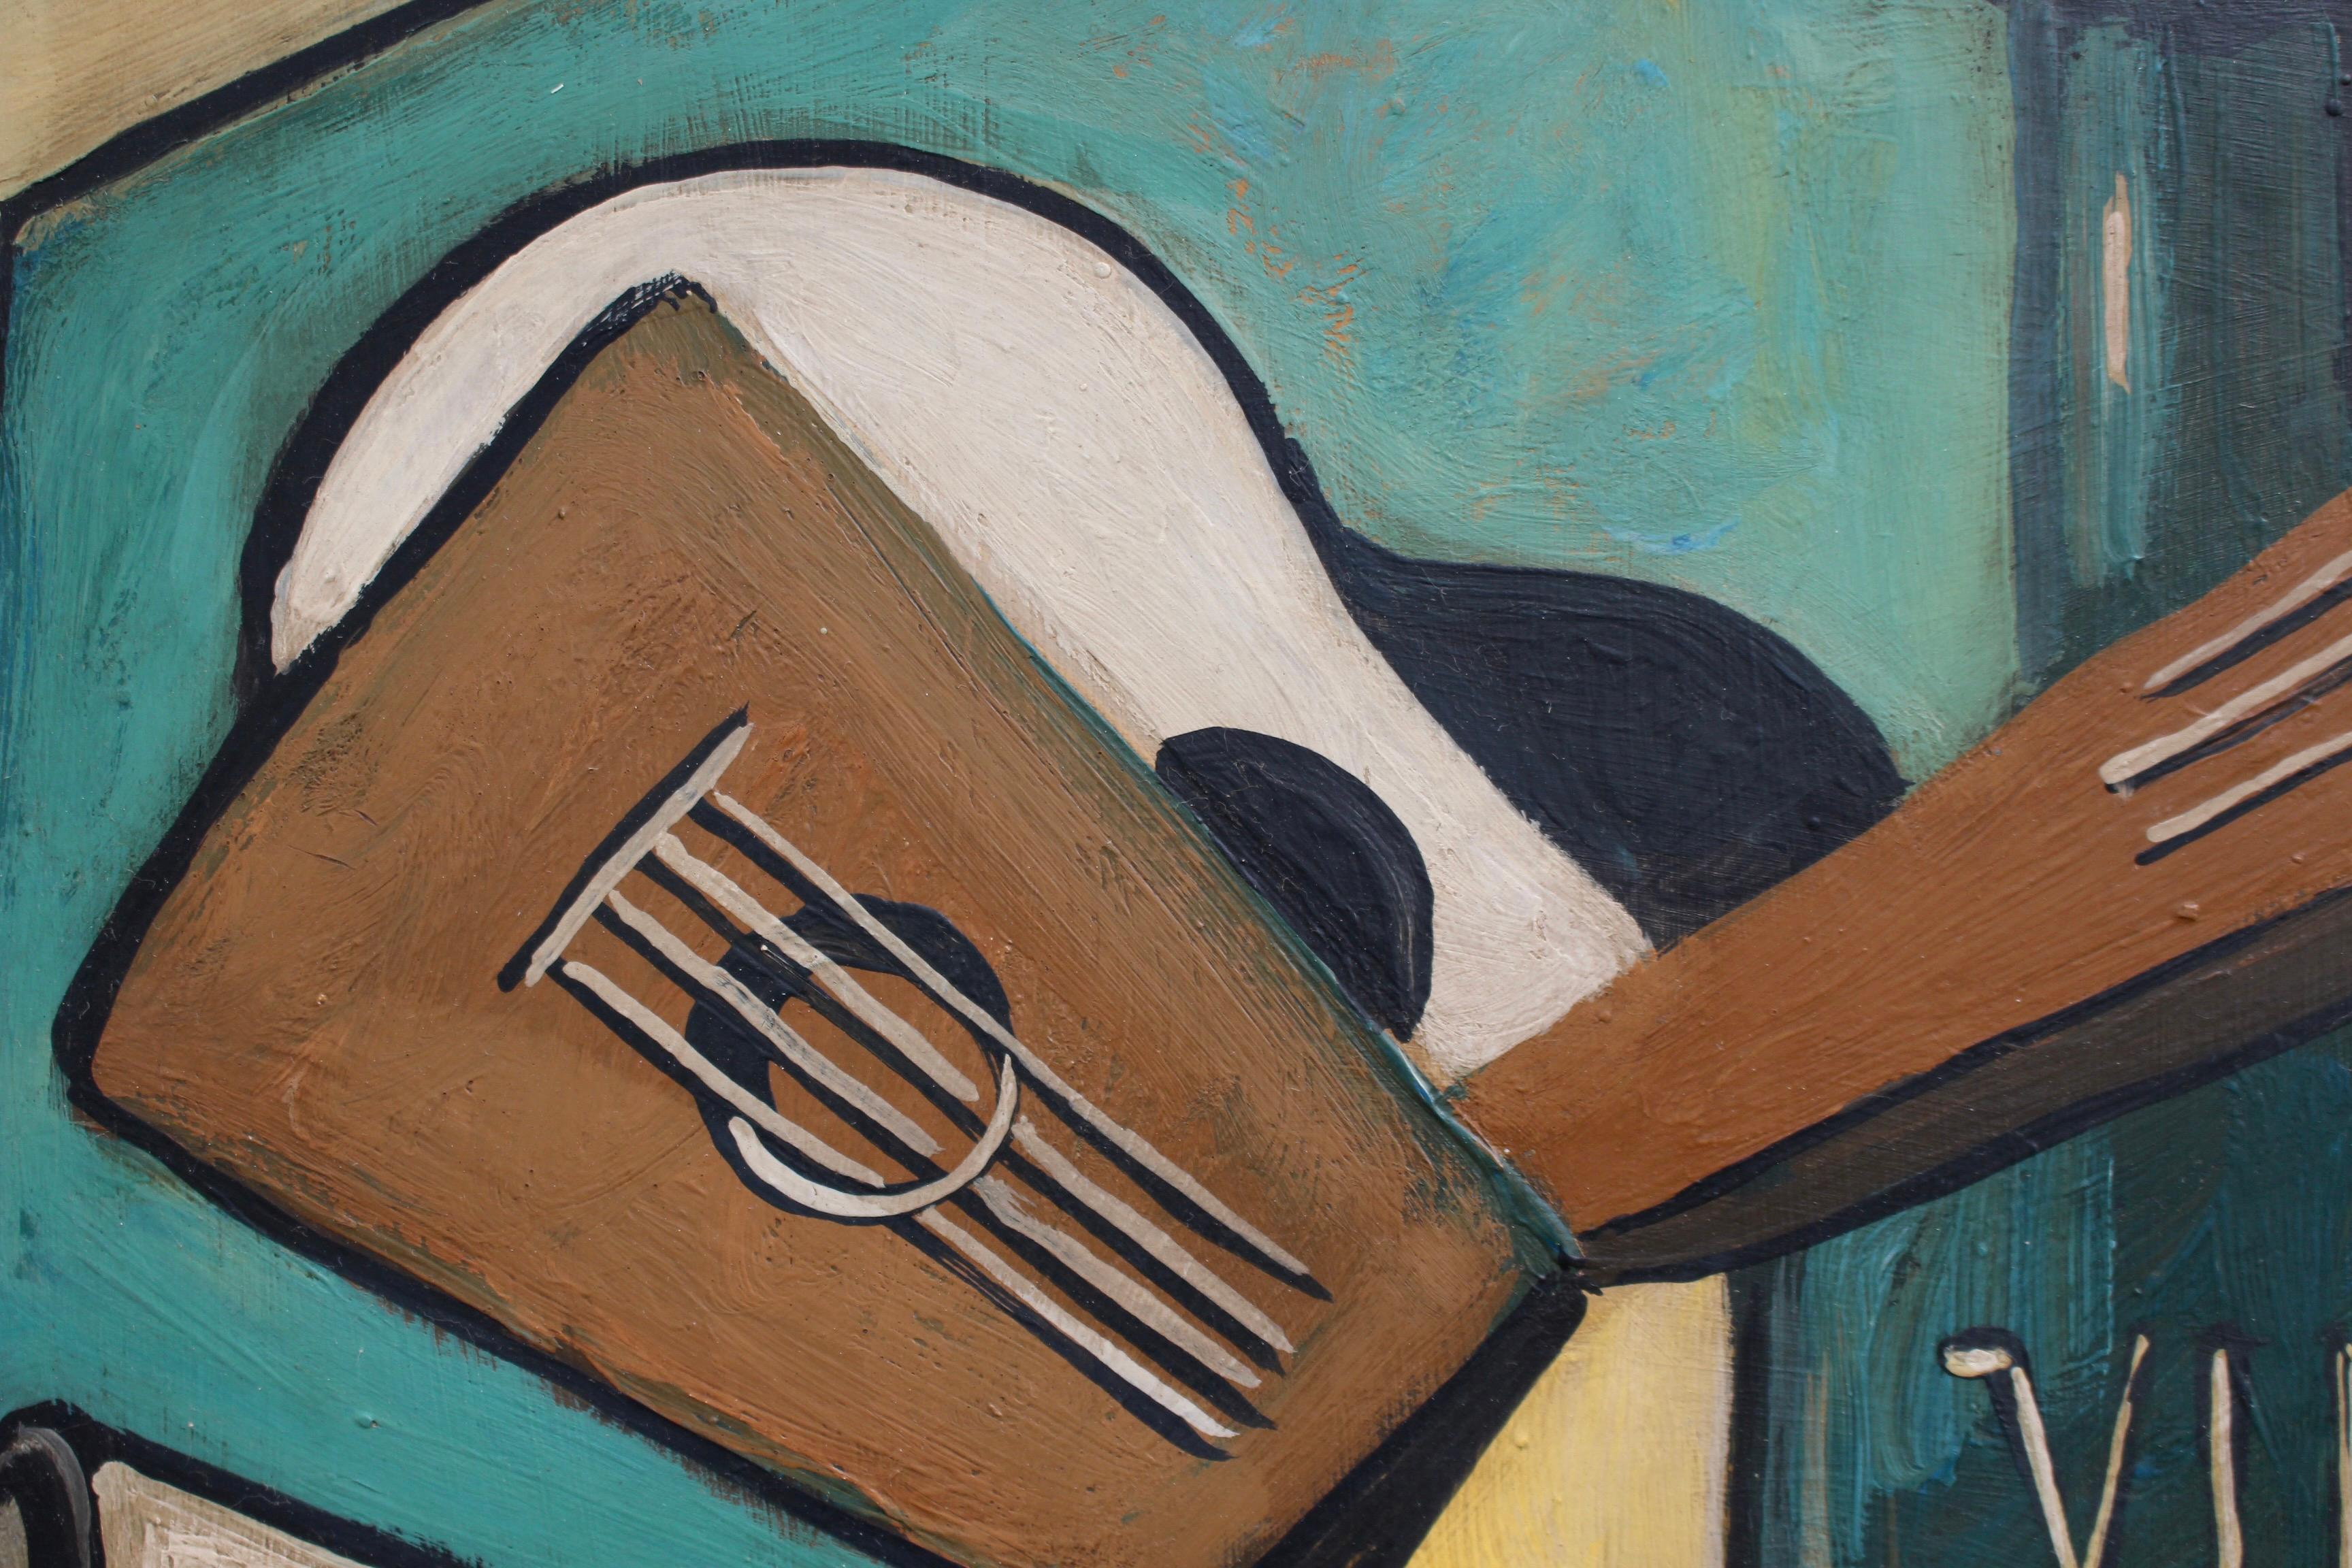 'Still Life with Guitar and Wine', oil on board, Berlin School (signed 'Demeyer'). Clearly inspired by the early cubist works of Gris, Braques and Picasso, each of whom created an artwork with similar subject in the early part of the 20th century.